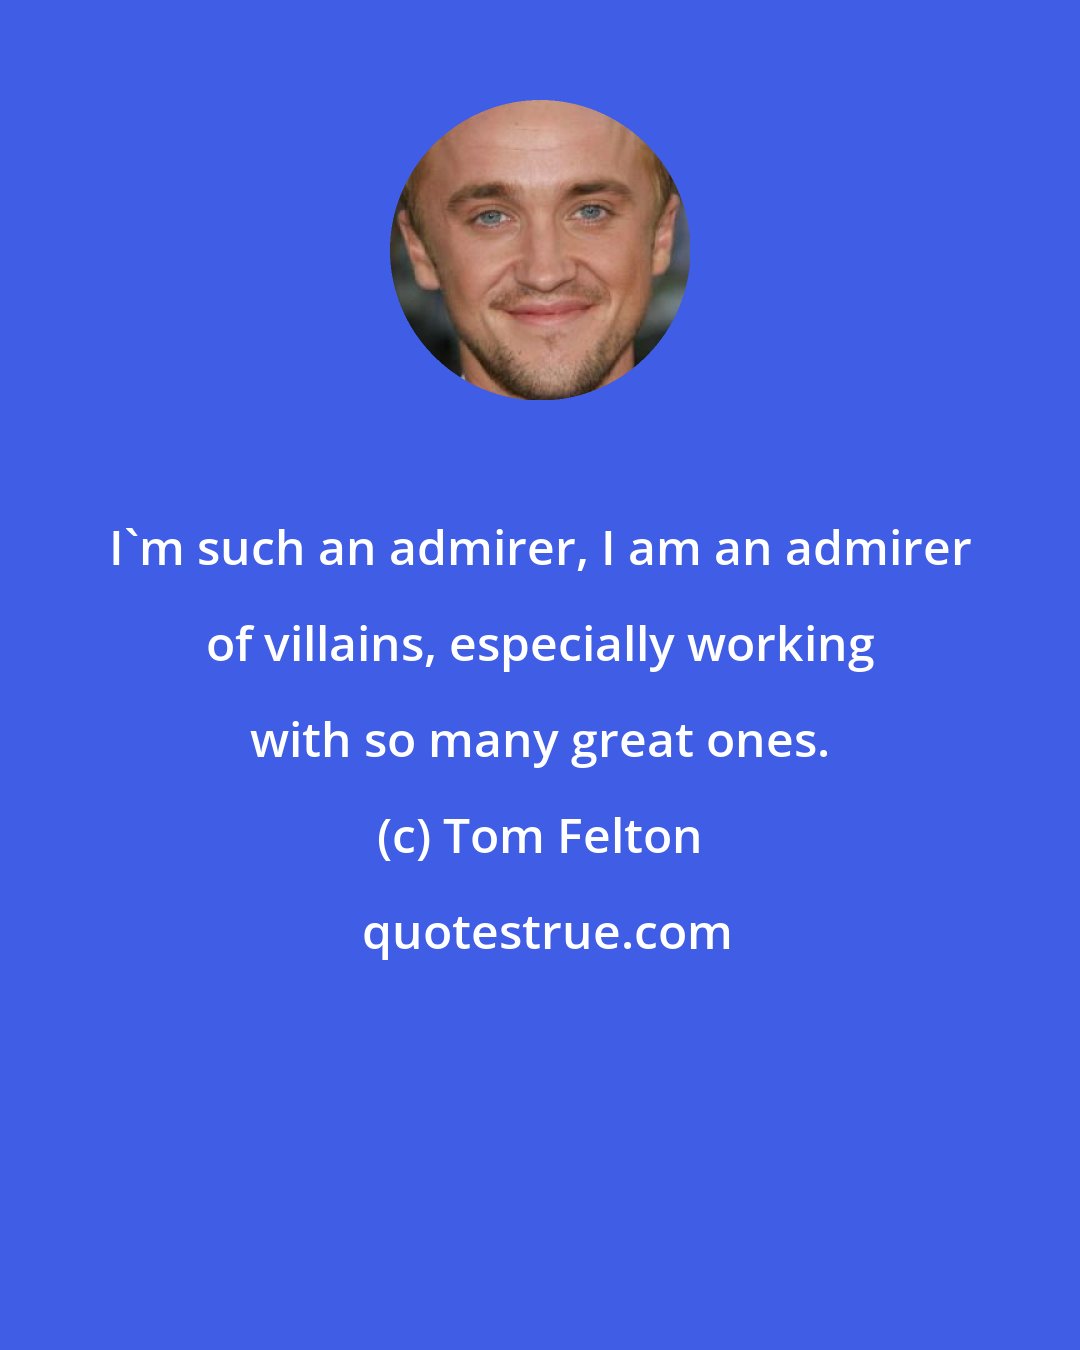 Tom Felton: I'm such an admirer, I am an admirer of villains, especially working with so many great ones.